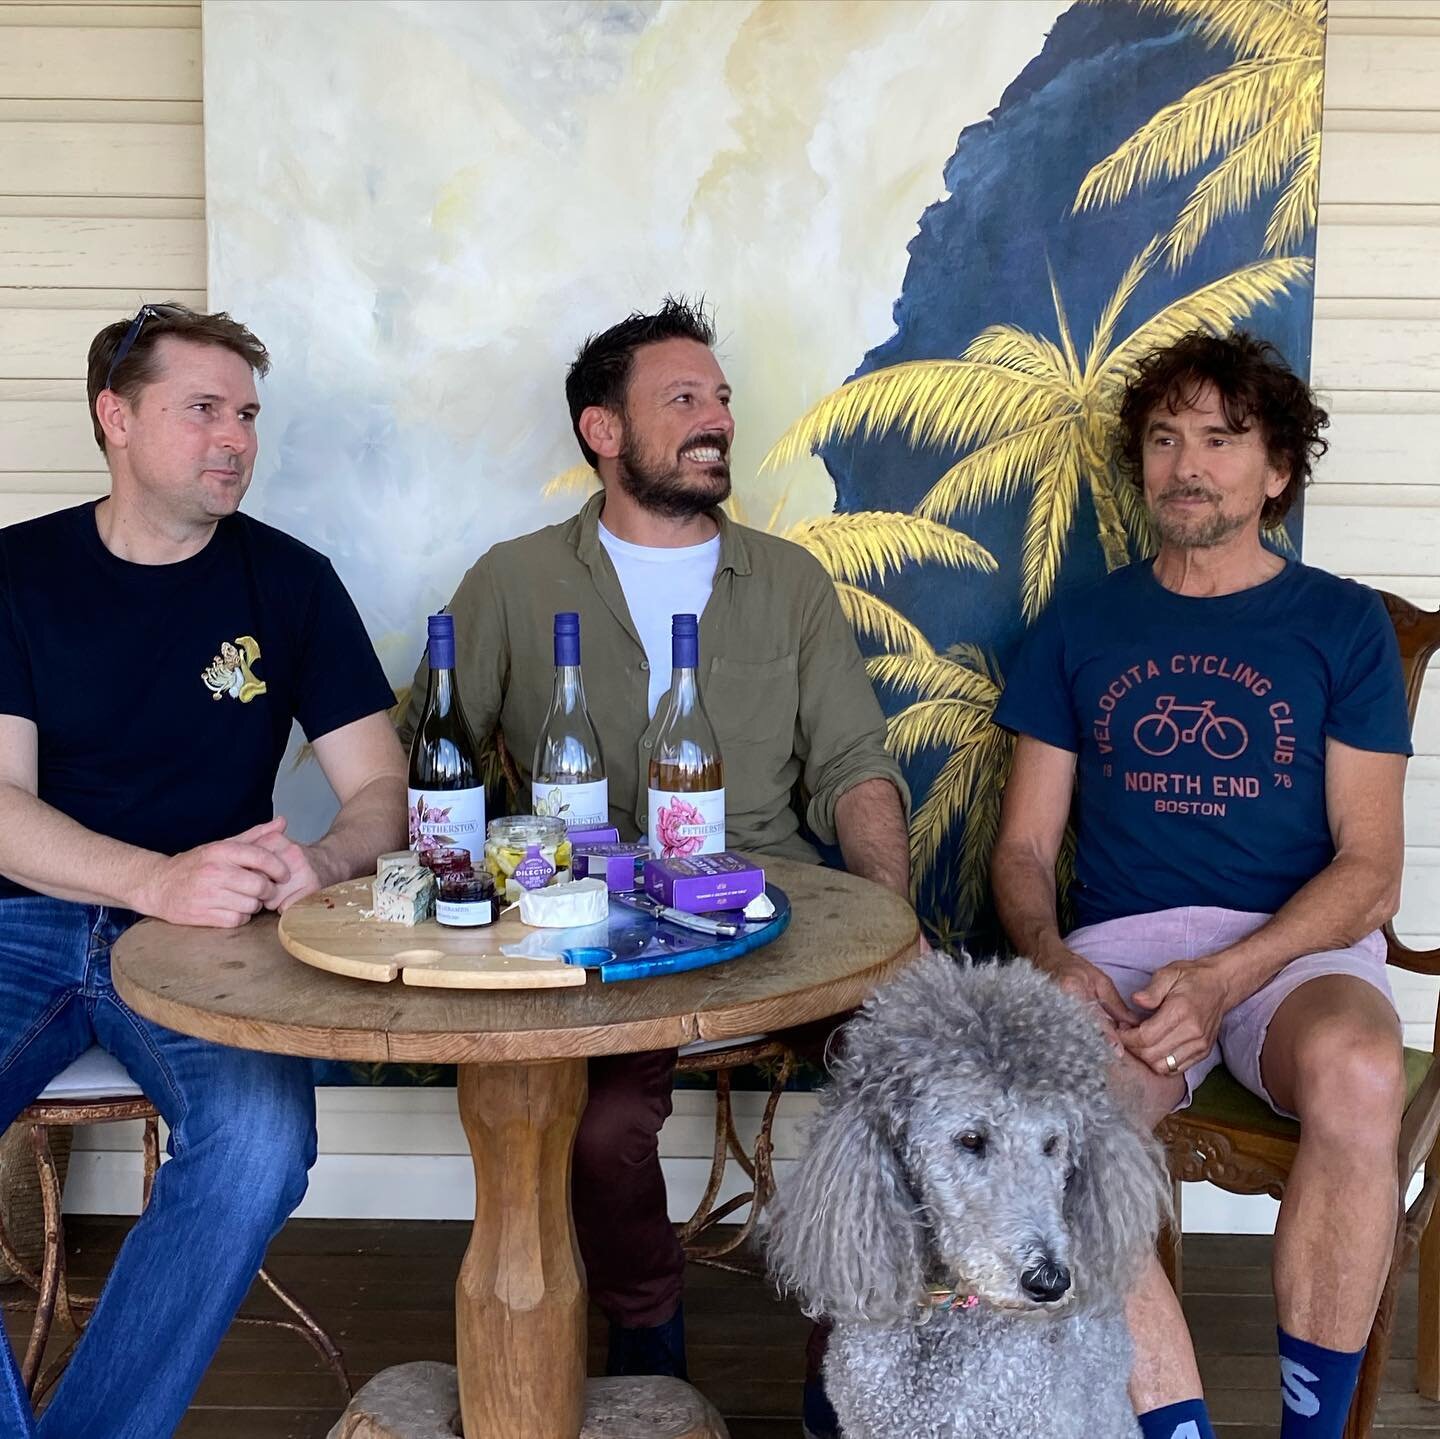 Fortunate to have these incredibly talented entrepreneurs offer their products to us for our up coming Writers festival soir&eacute;e we&rsquo;re hosting here at Grand Pacific House. Newrybar (Byron Bay). 
Come visit us this Saturday 4-8pm and enjoy 